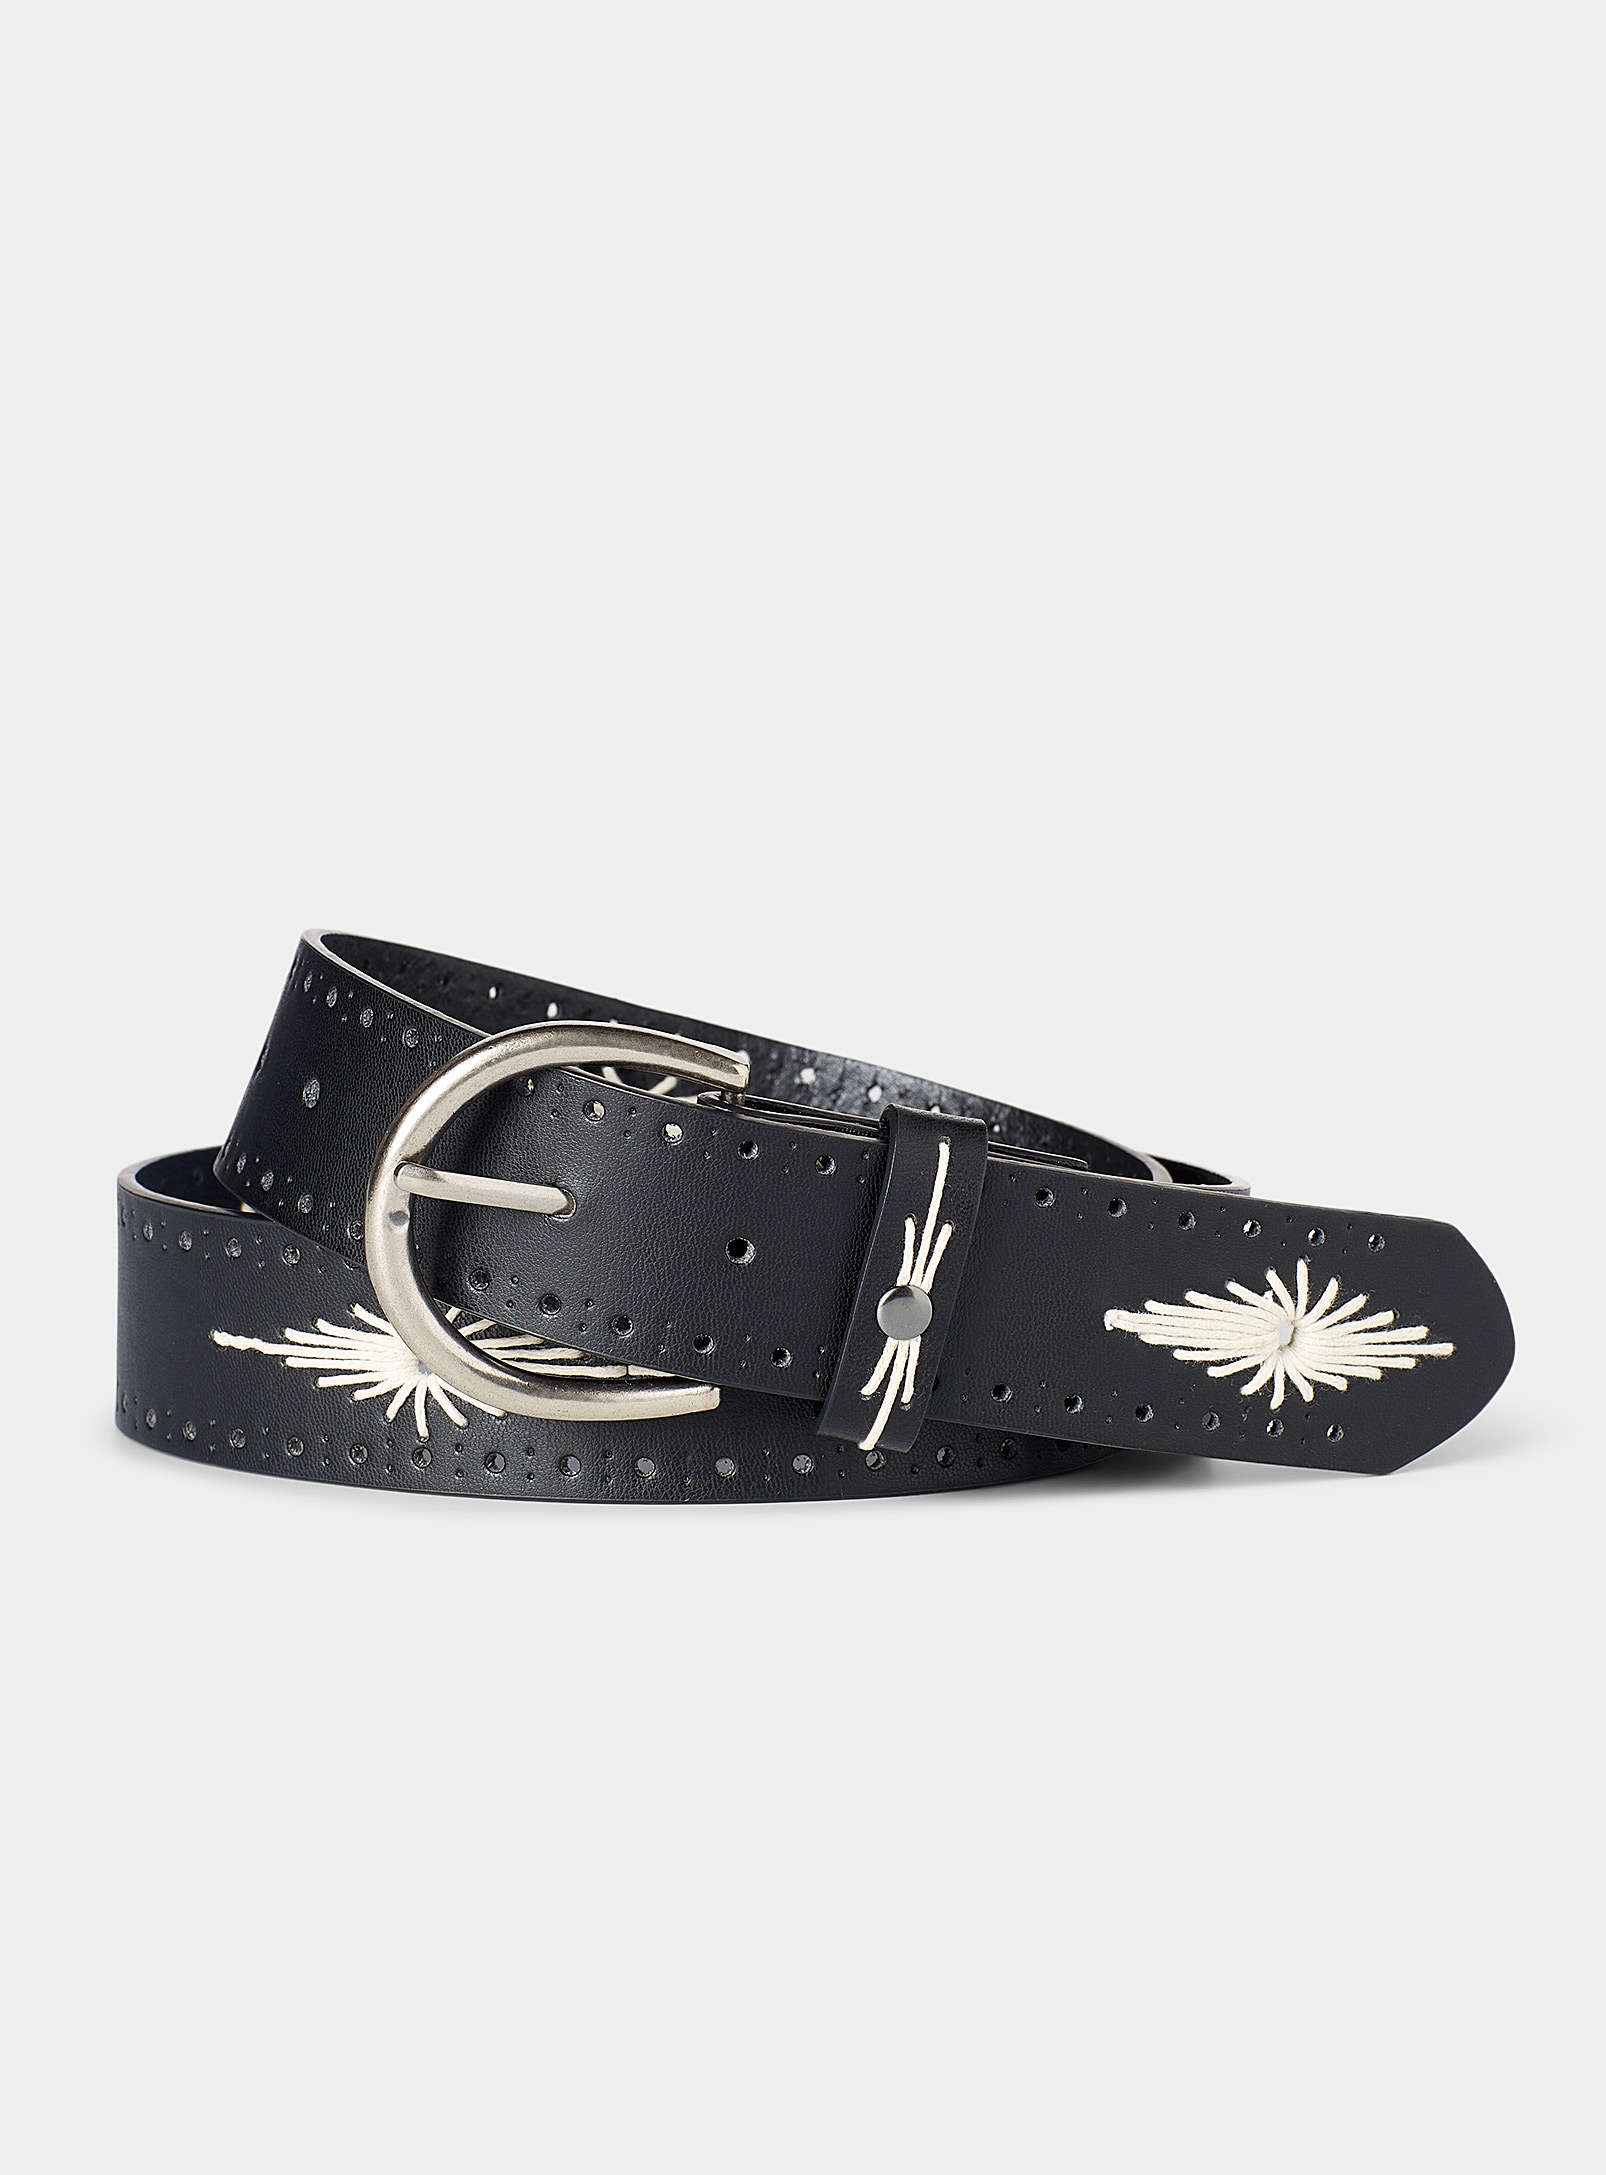 Simons - Women's Embroidered and perforated wide belt